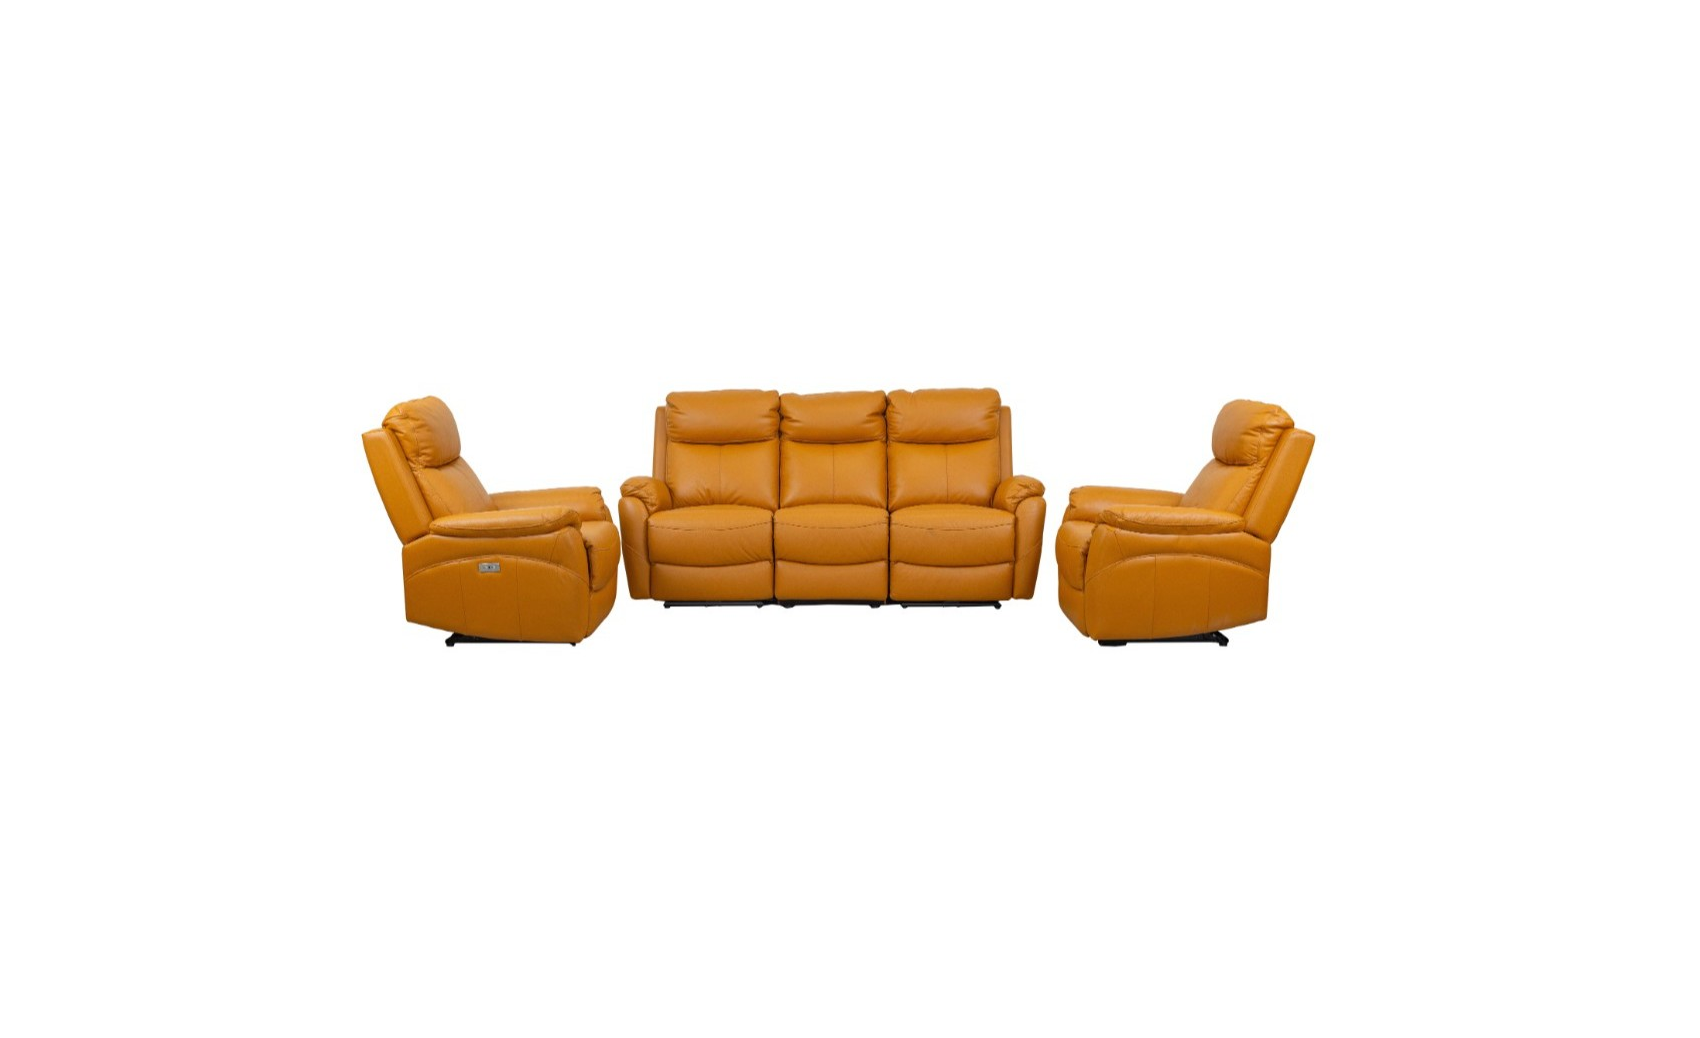 Camden Recliner Leather Sofa 3+1+1 Seater Electric Lounge Set - Tangerine